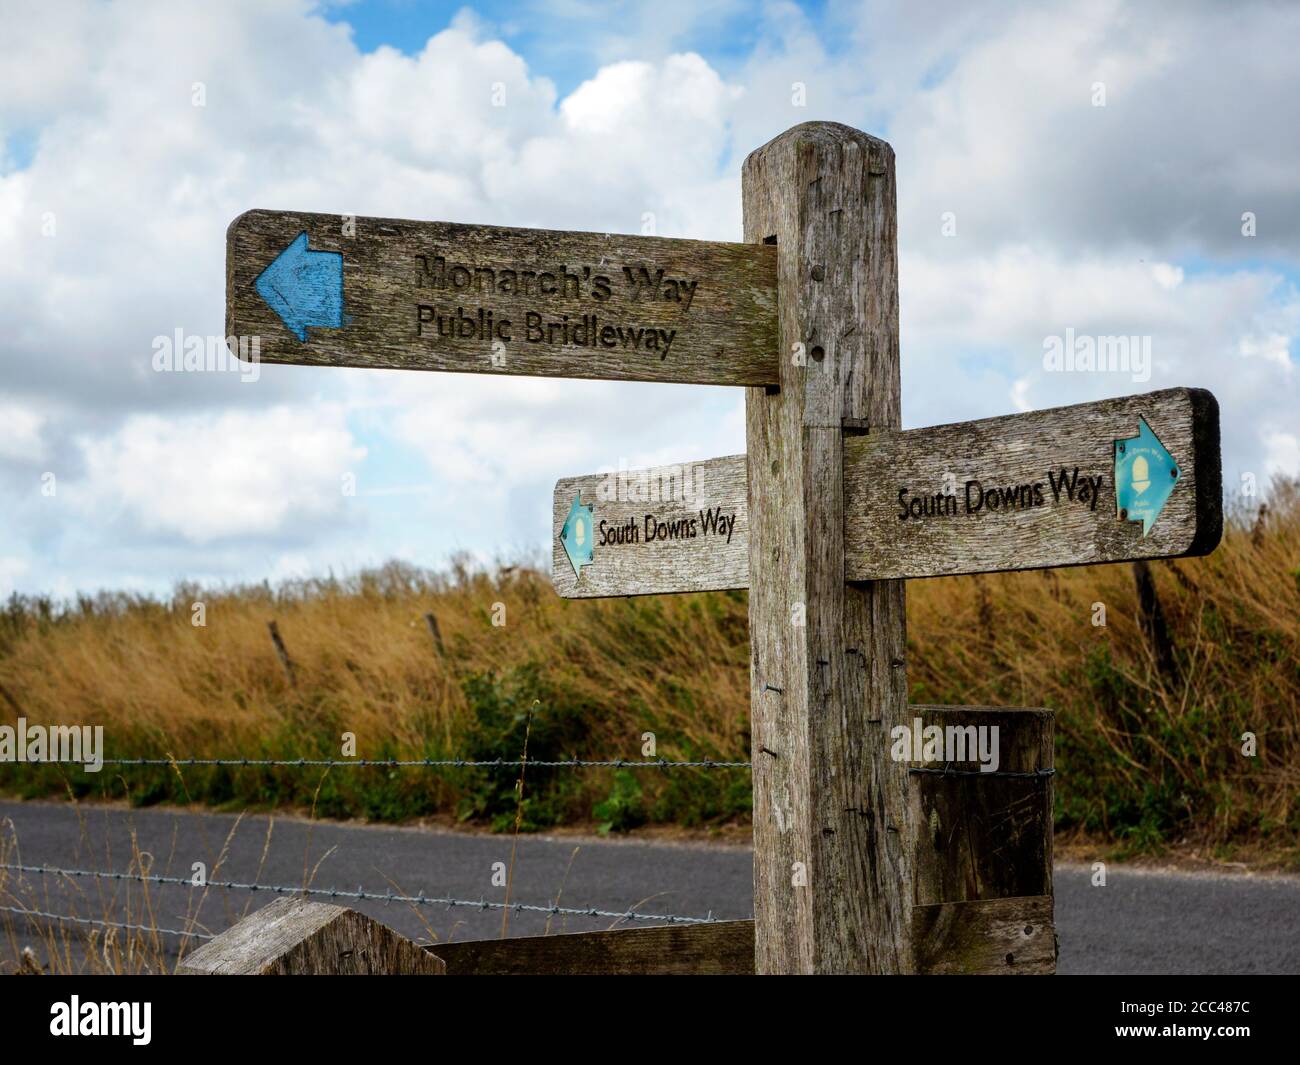 Meeting of the South Downs Way and the long-distance Monarch’s Way paths above Steyning, West Sussex Stock Photo